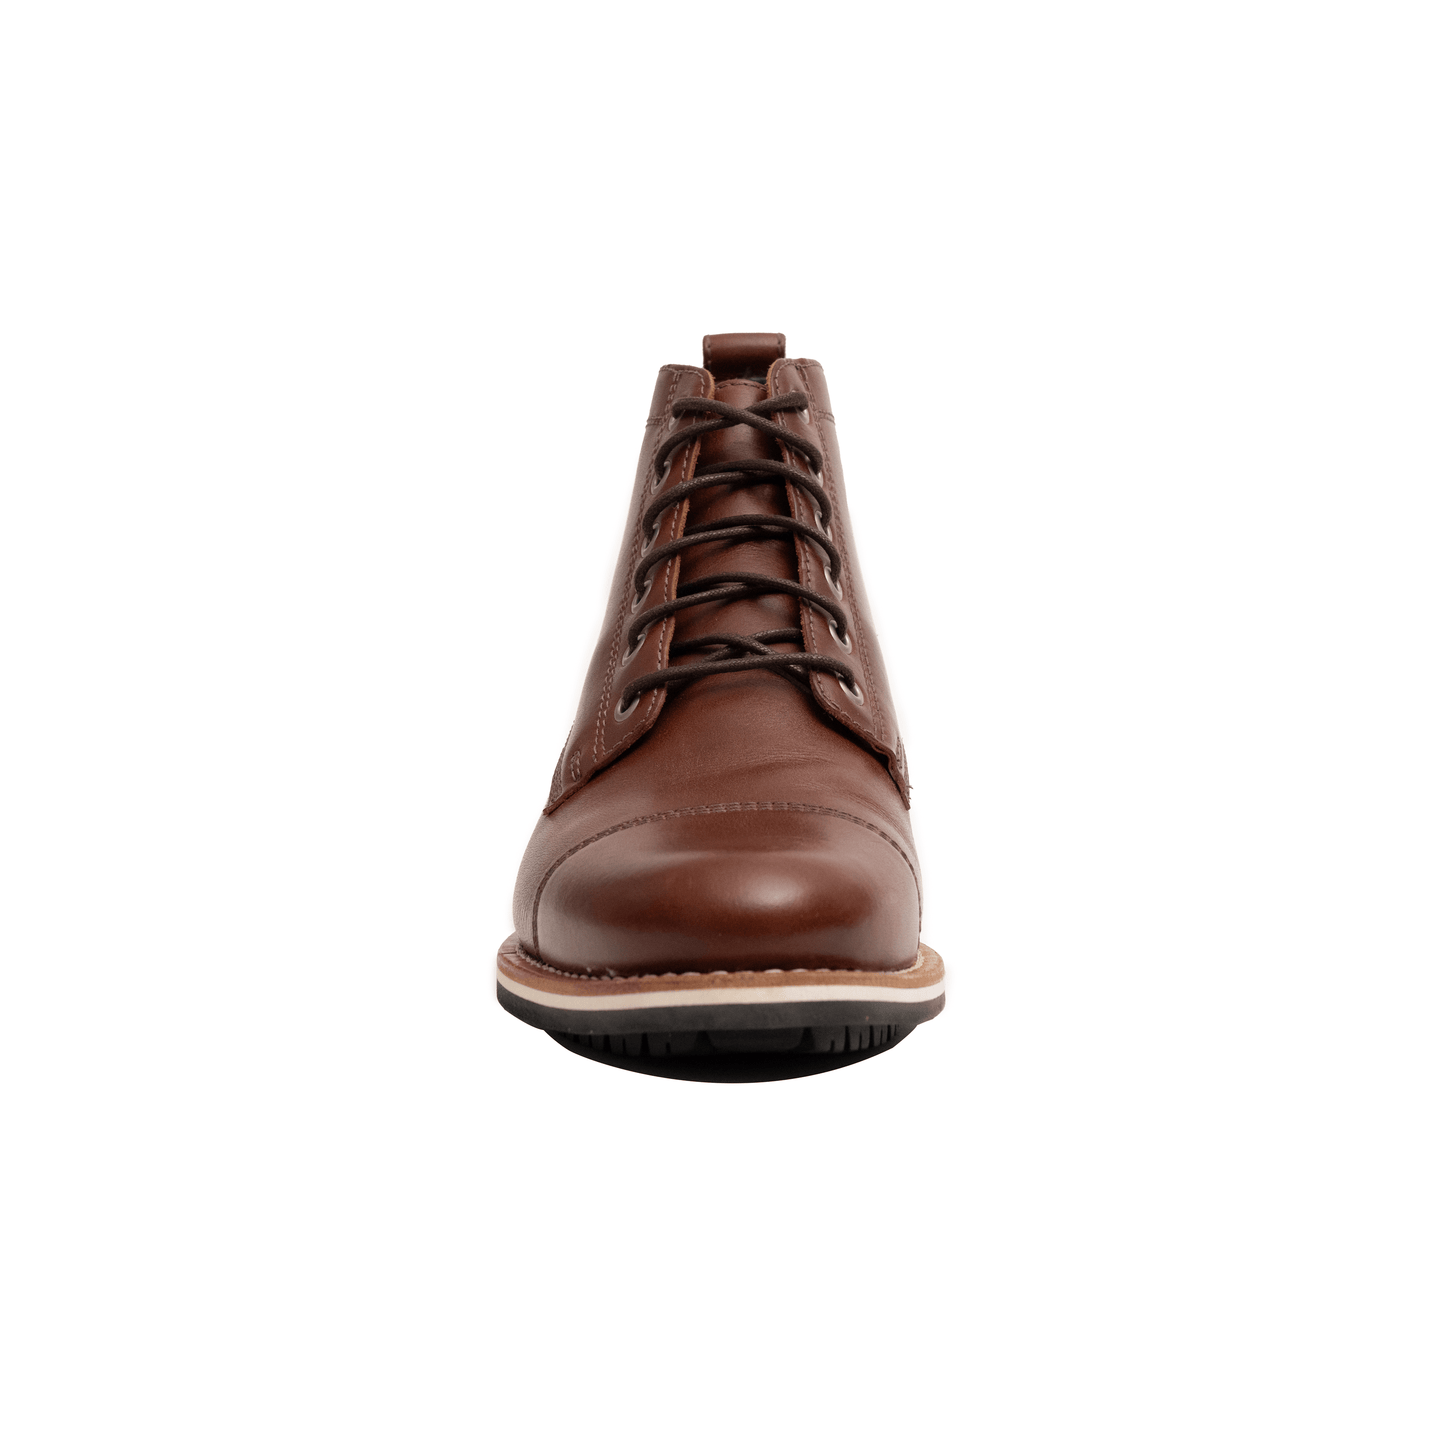 HELM Boots The Hollis Brown